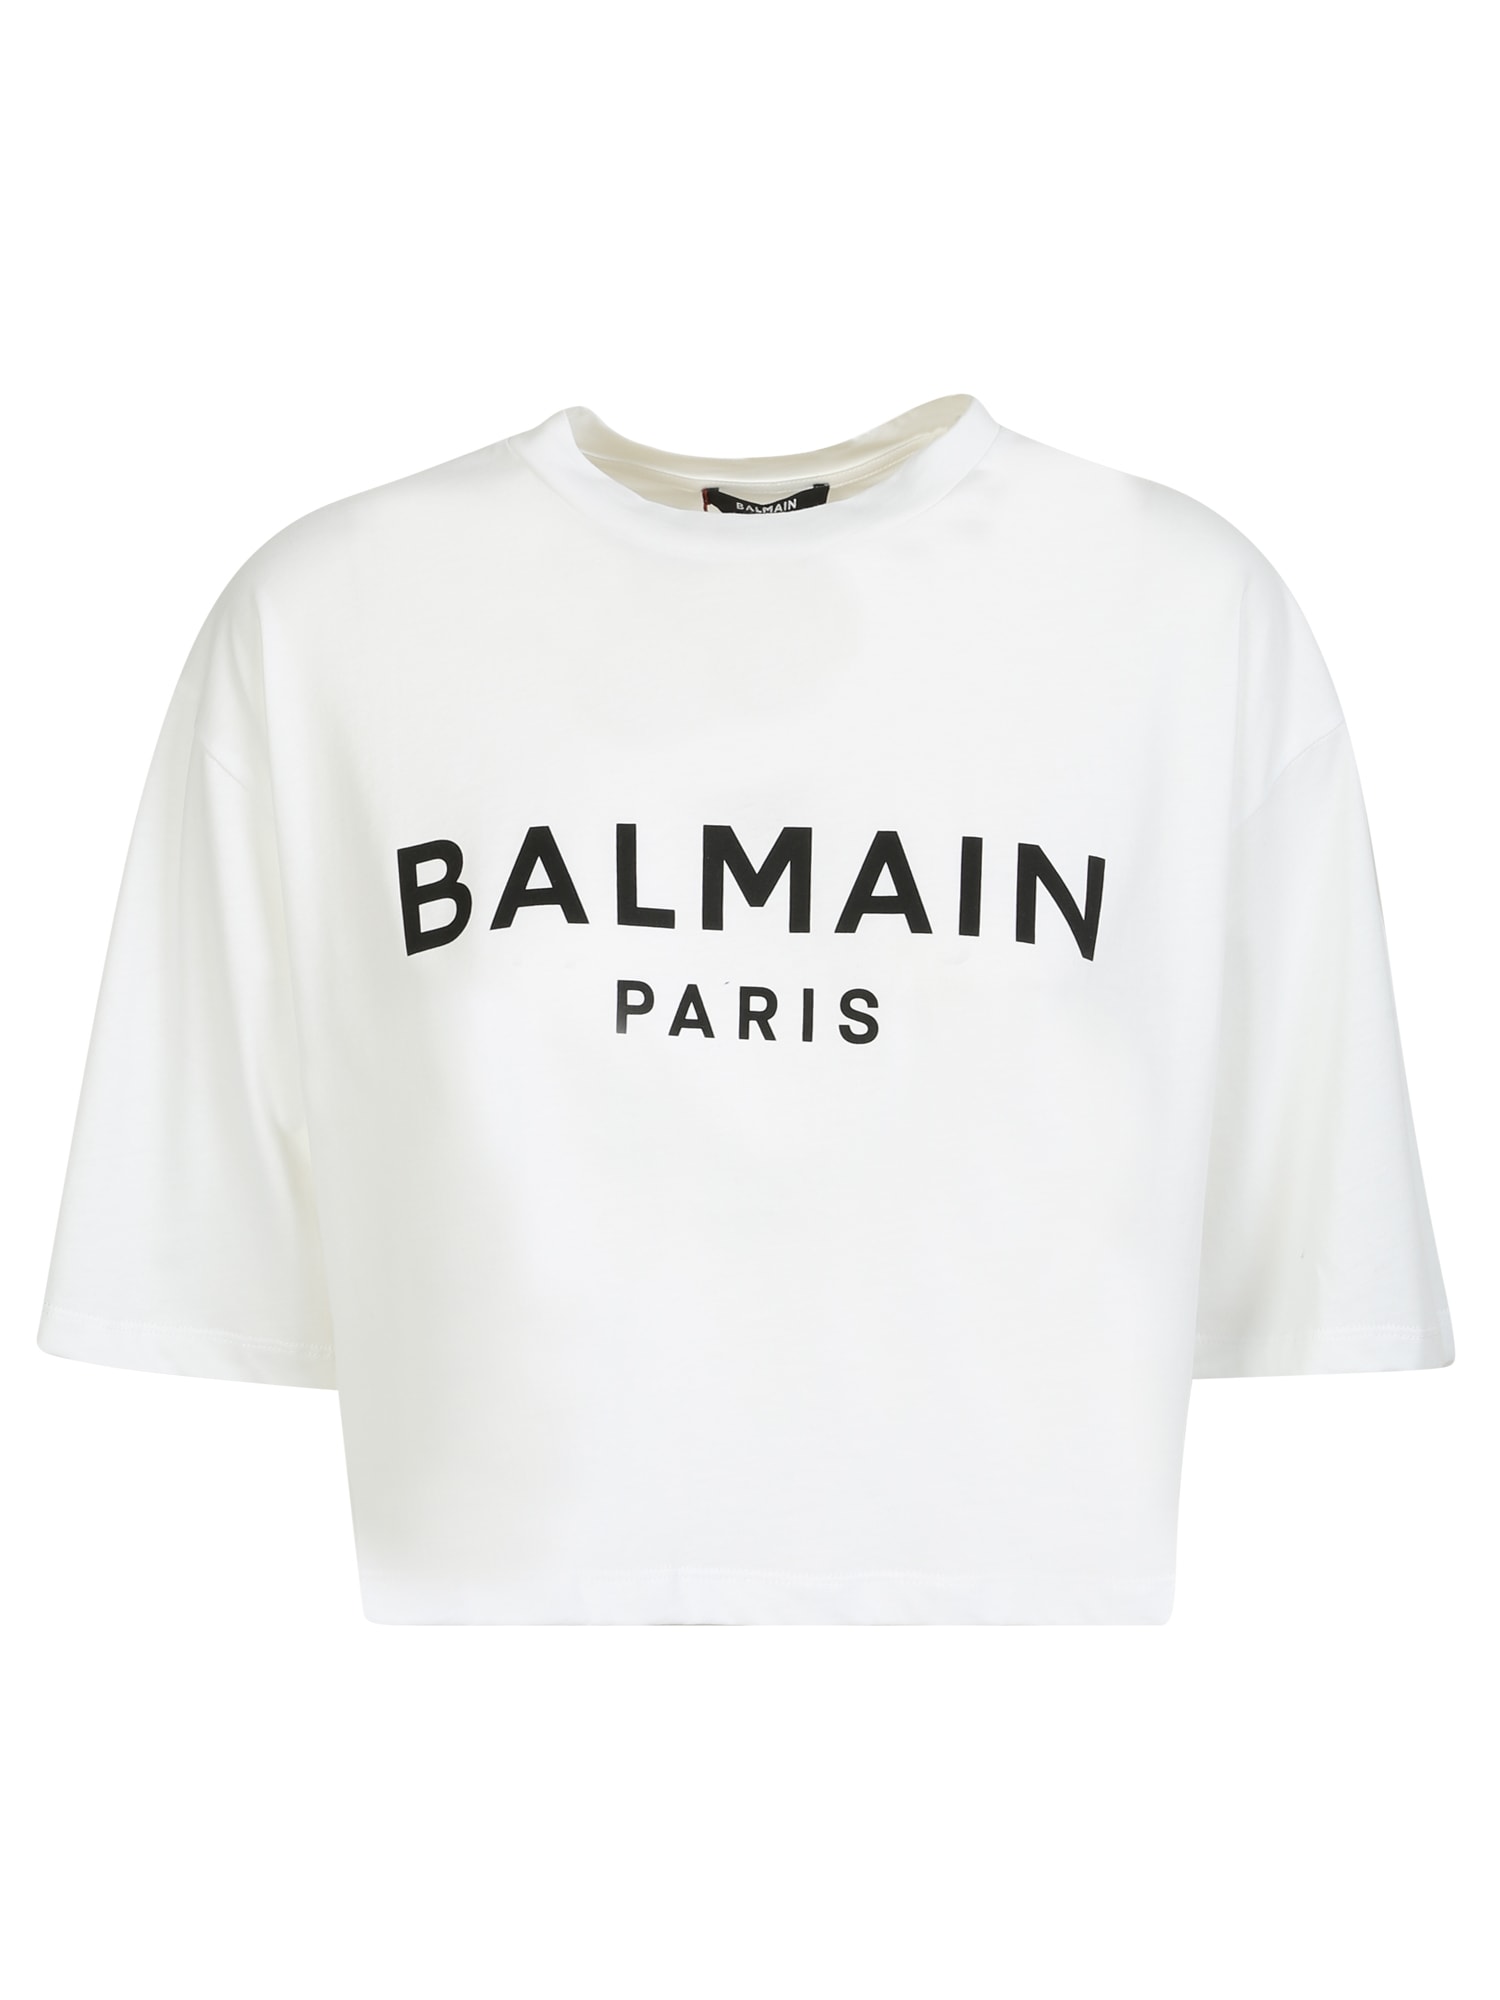 The Iconic Balmain Logo Print Shirt Has Been Revisited In A Cropped Key, Making It Unique And Timeless